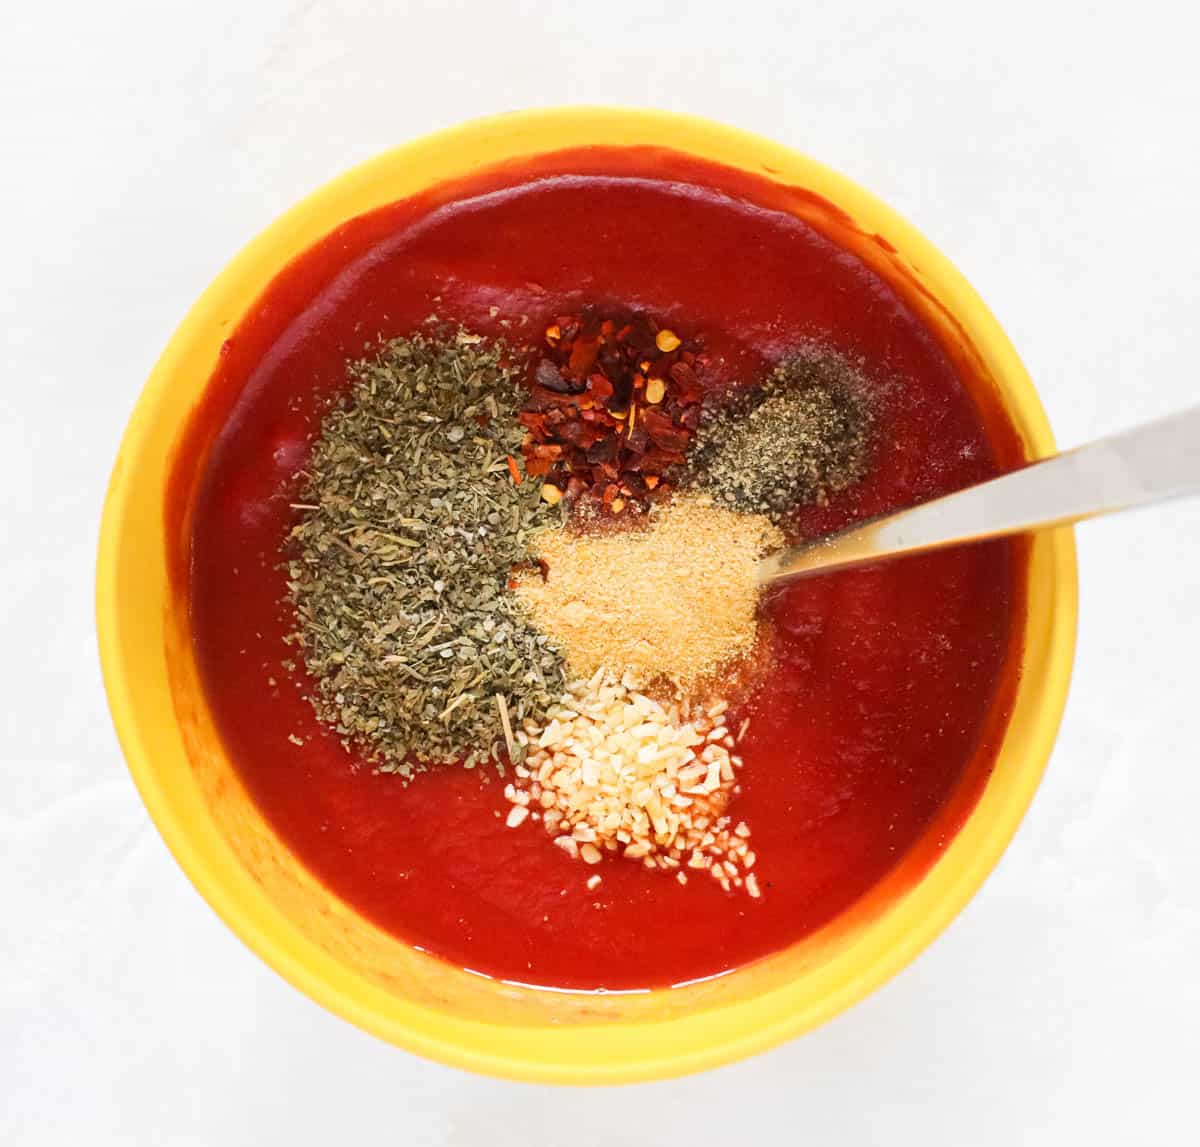 yellow bowl with tomato sauce, tomato paste, onion flakes, garlic powder, black pepper, and red pepper flakes with a fork to stir.